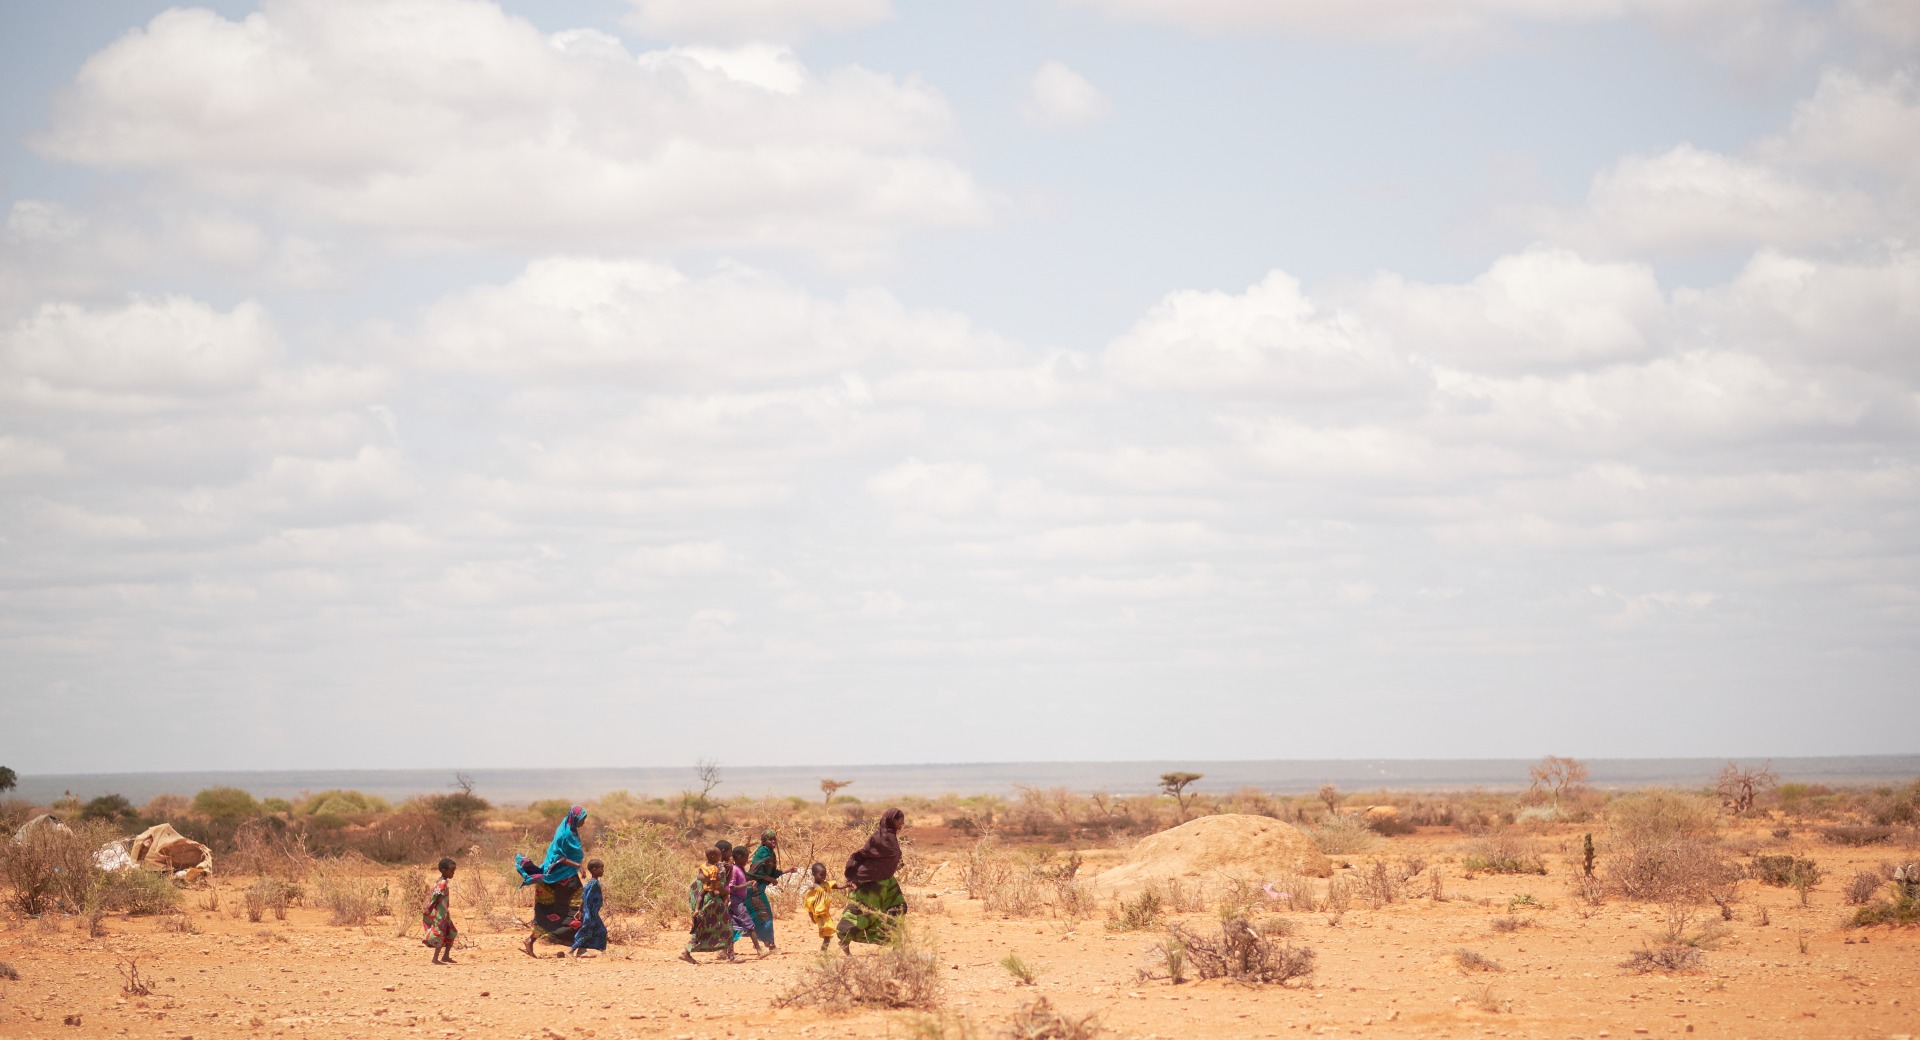 Severe drought in the Horn and East Africa is displacing communities and driving hunger that threatens to worsen in the coming months.